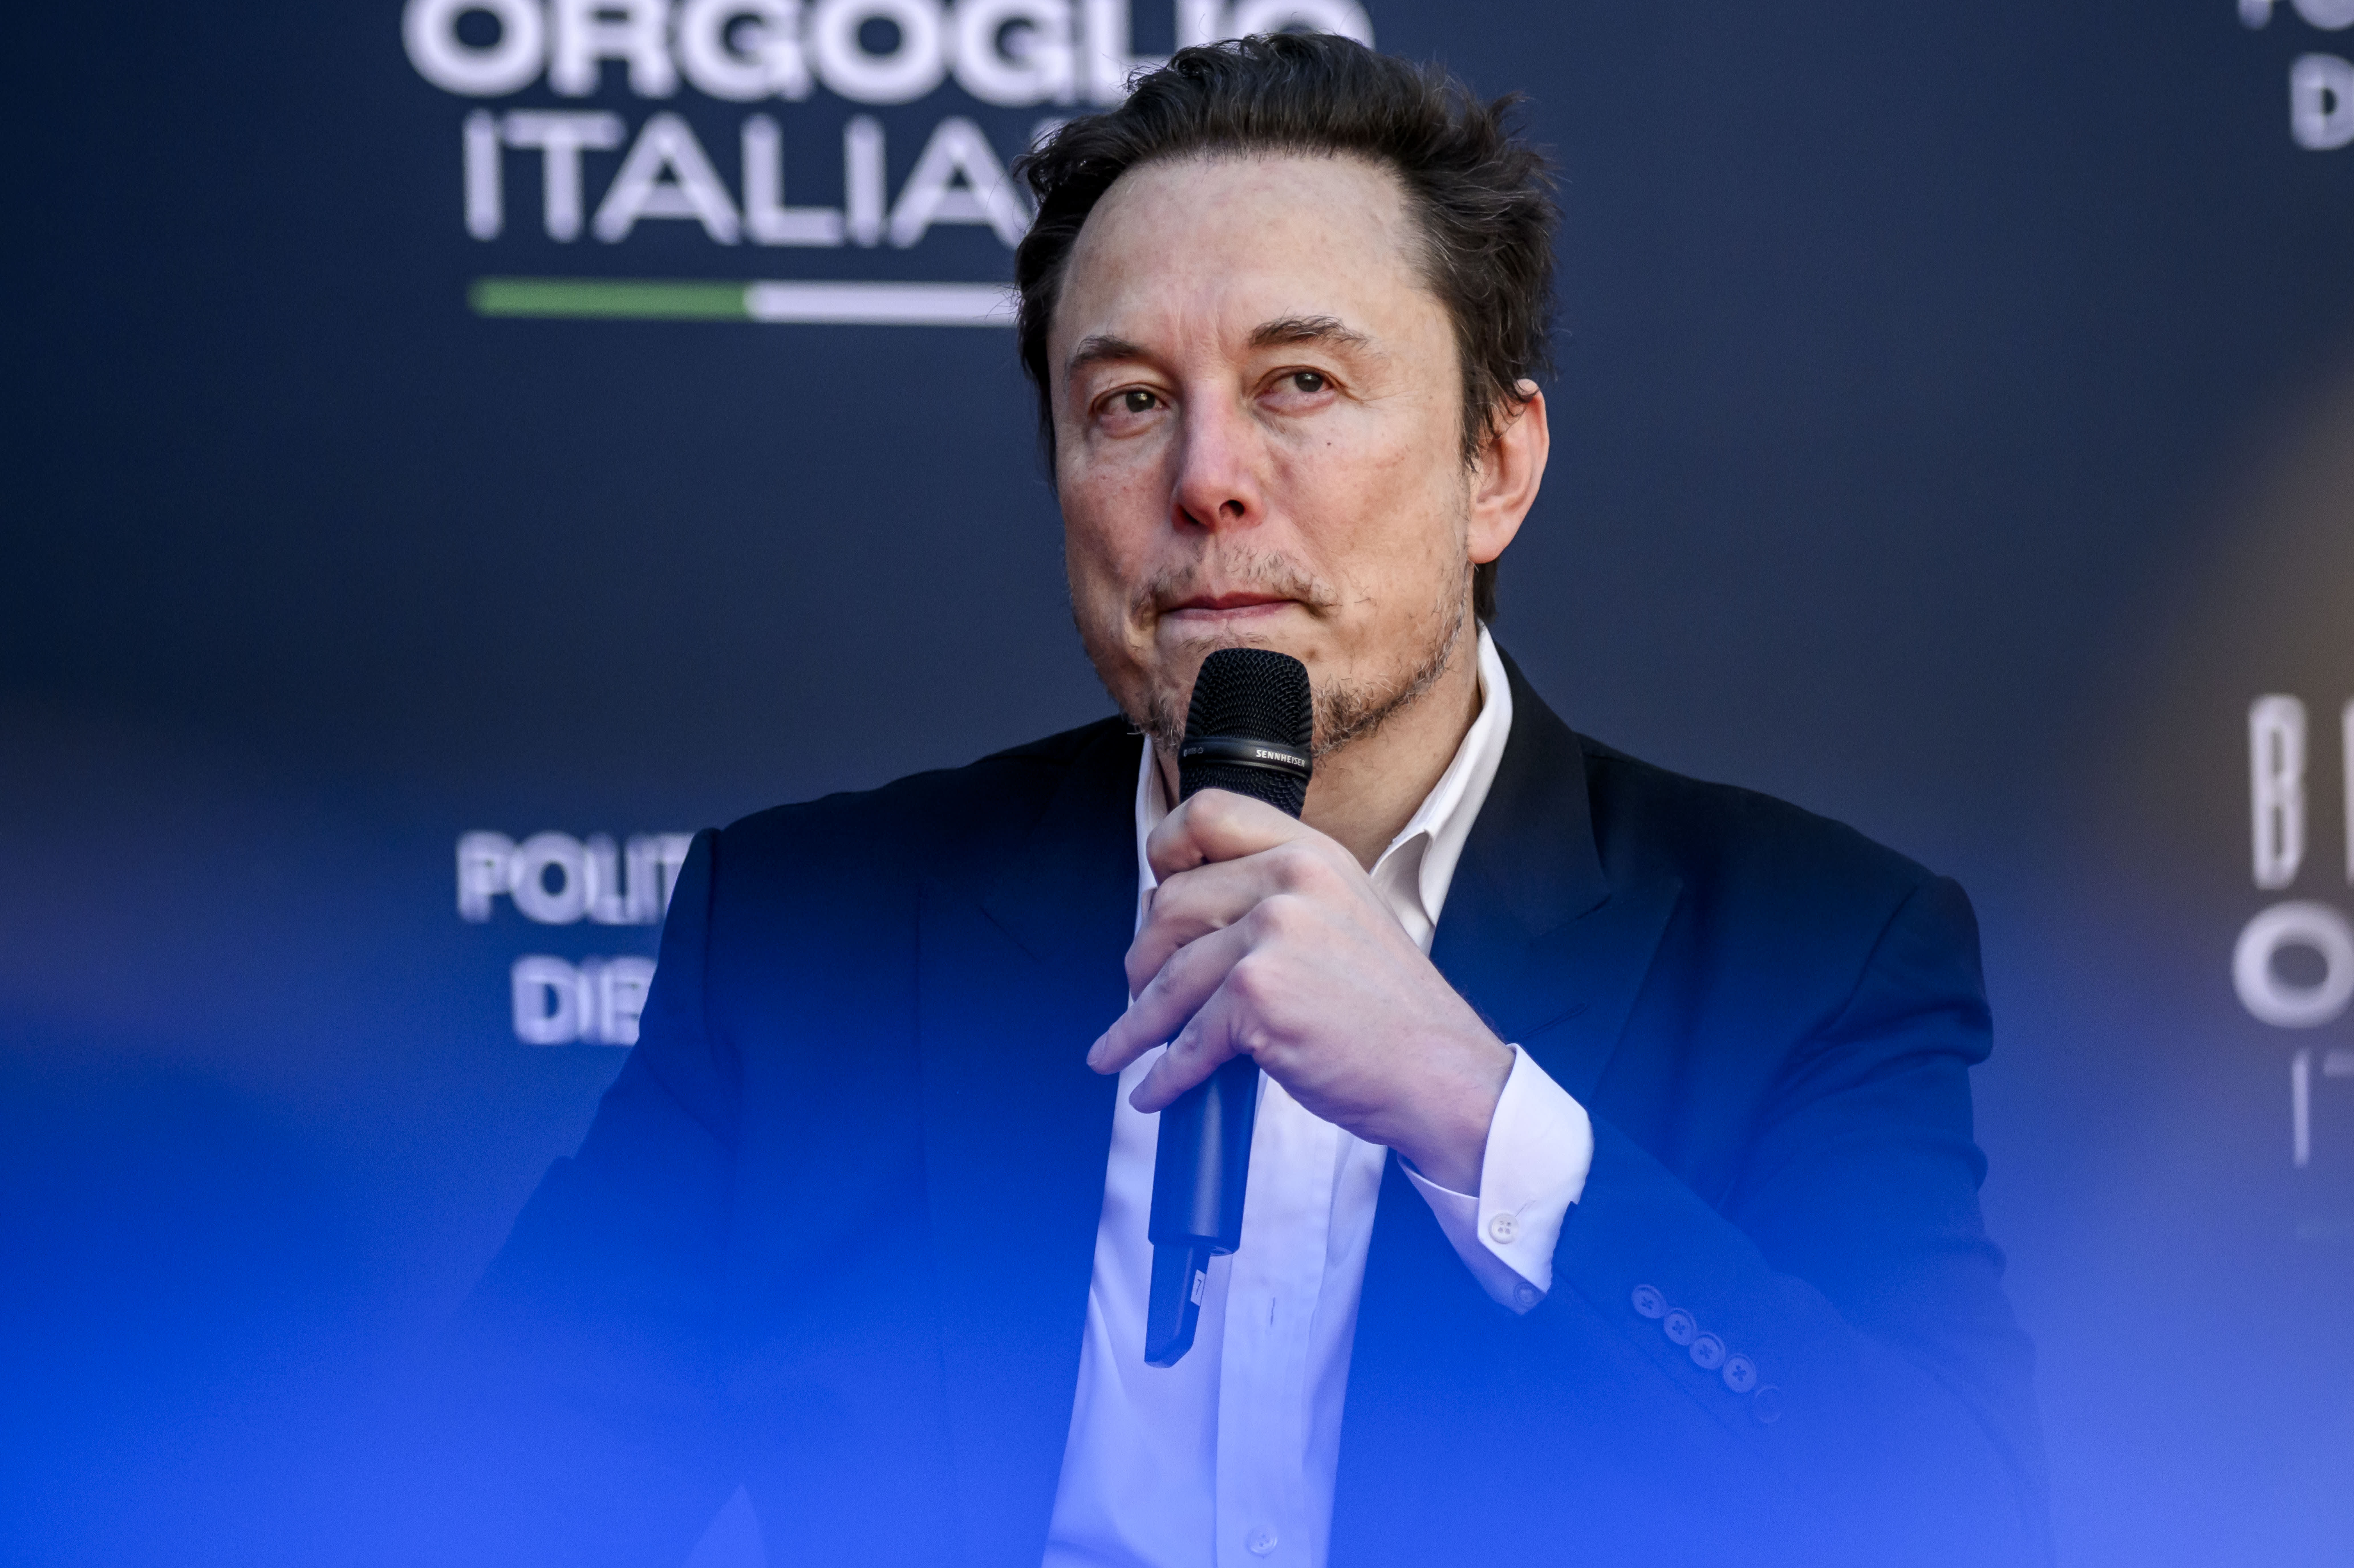 House China chair demands Elon Musk provide SpaceX internet for U.S. troops in Taiwan